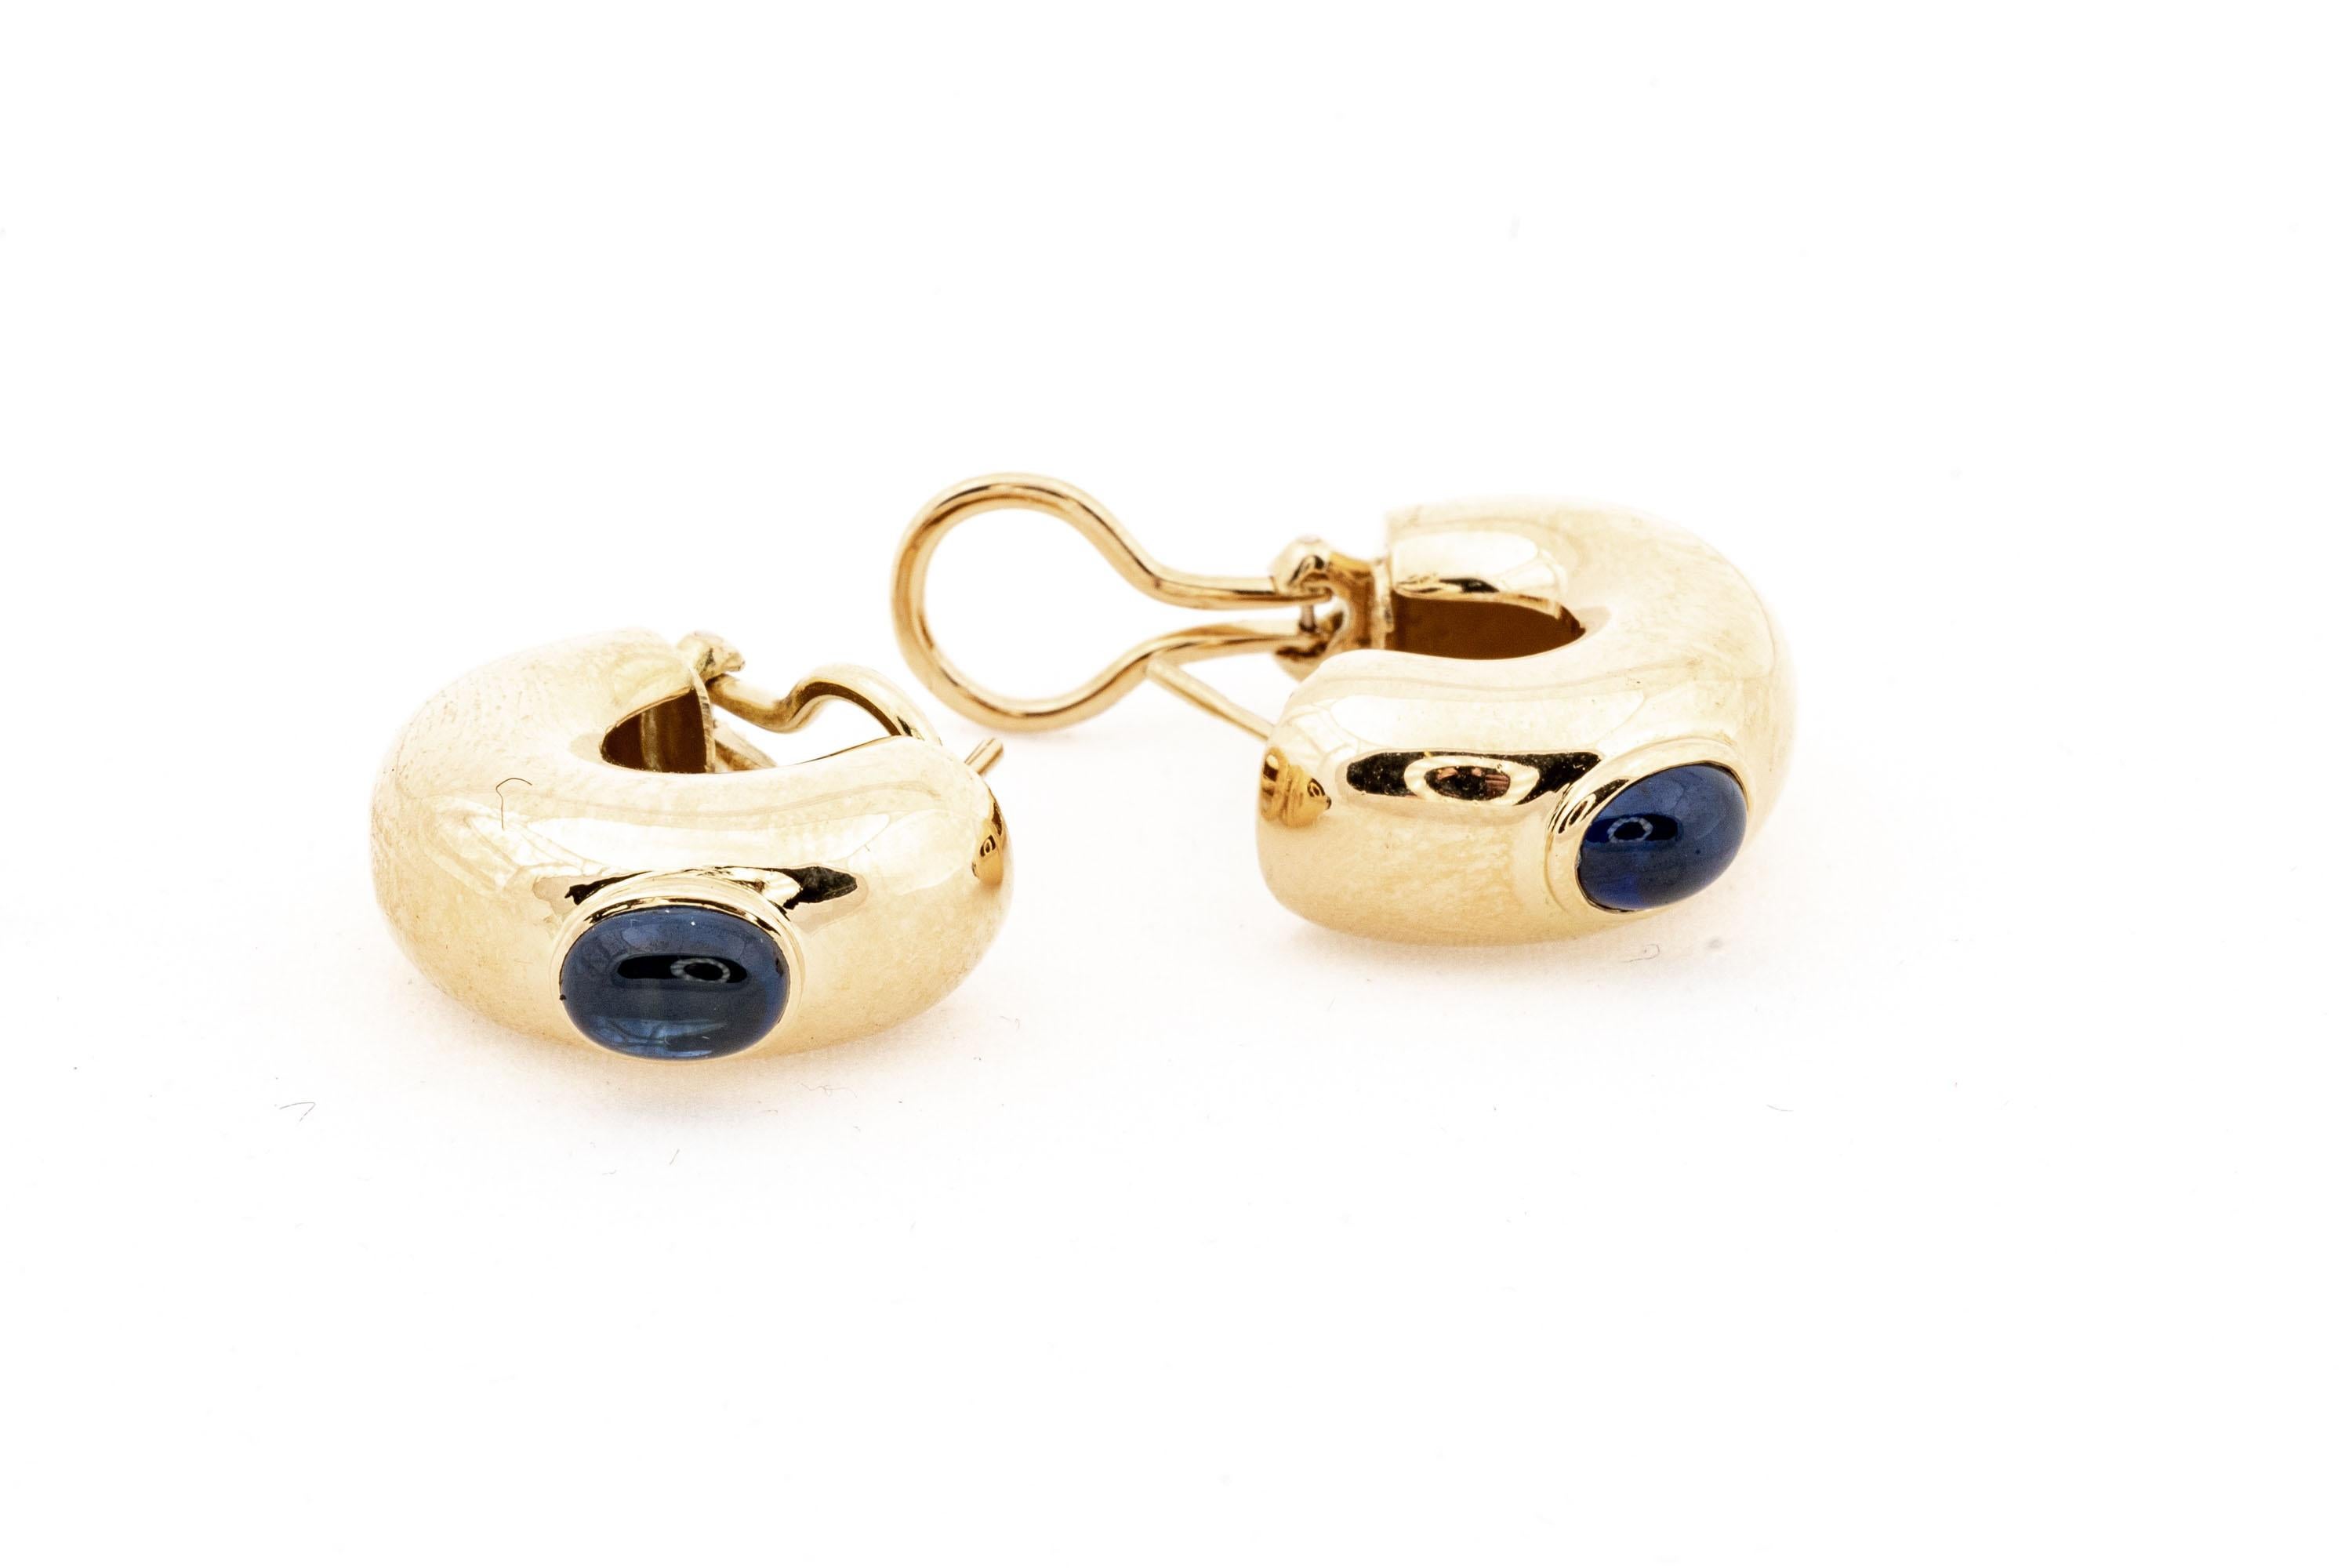 Chaumet Paris 18k yellow gold chunky half hoop earrings. These stunning earrings are from the House of Chaumet (the oldest luxury jeweler still in operation today) and contain one bezel set oval cabachon cut medium/dark blue sapphire each,